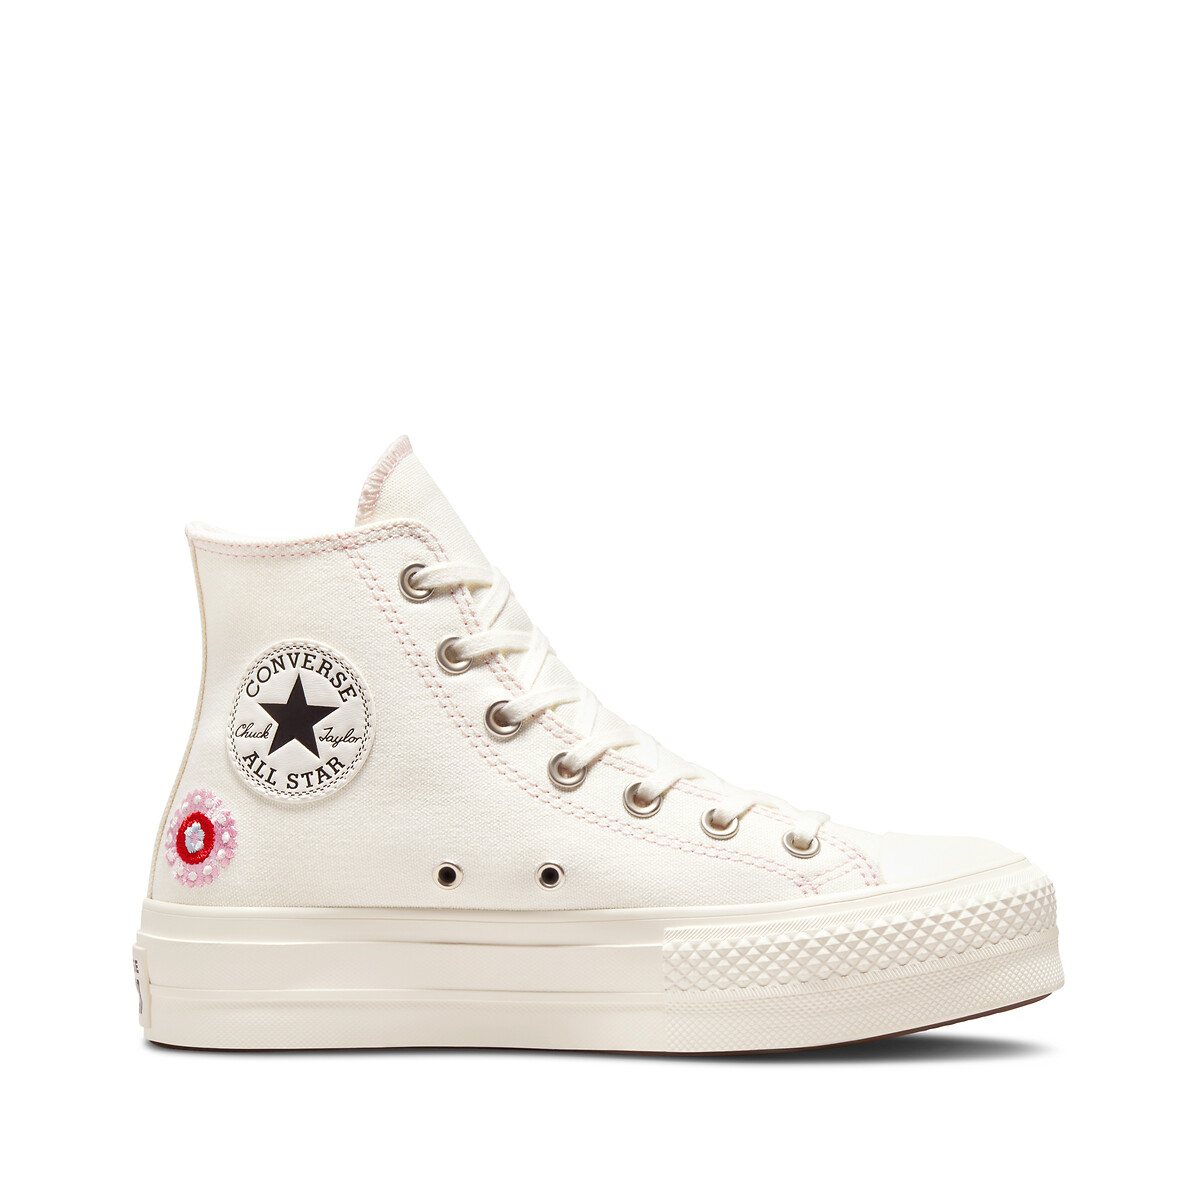 chuck taylor festival energy vibes canvas high top trainers